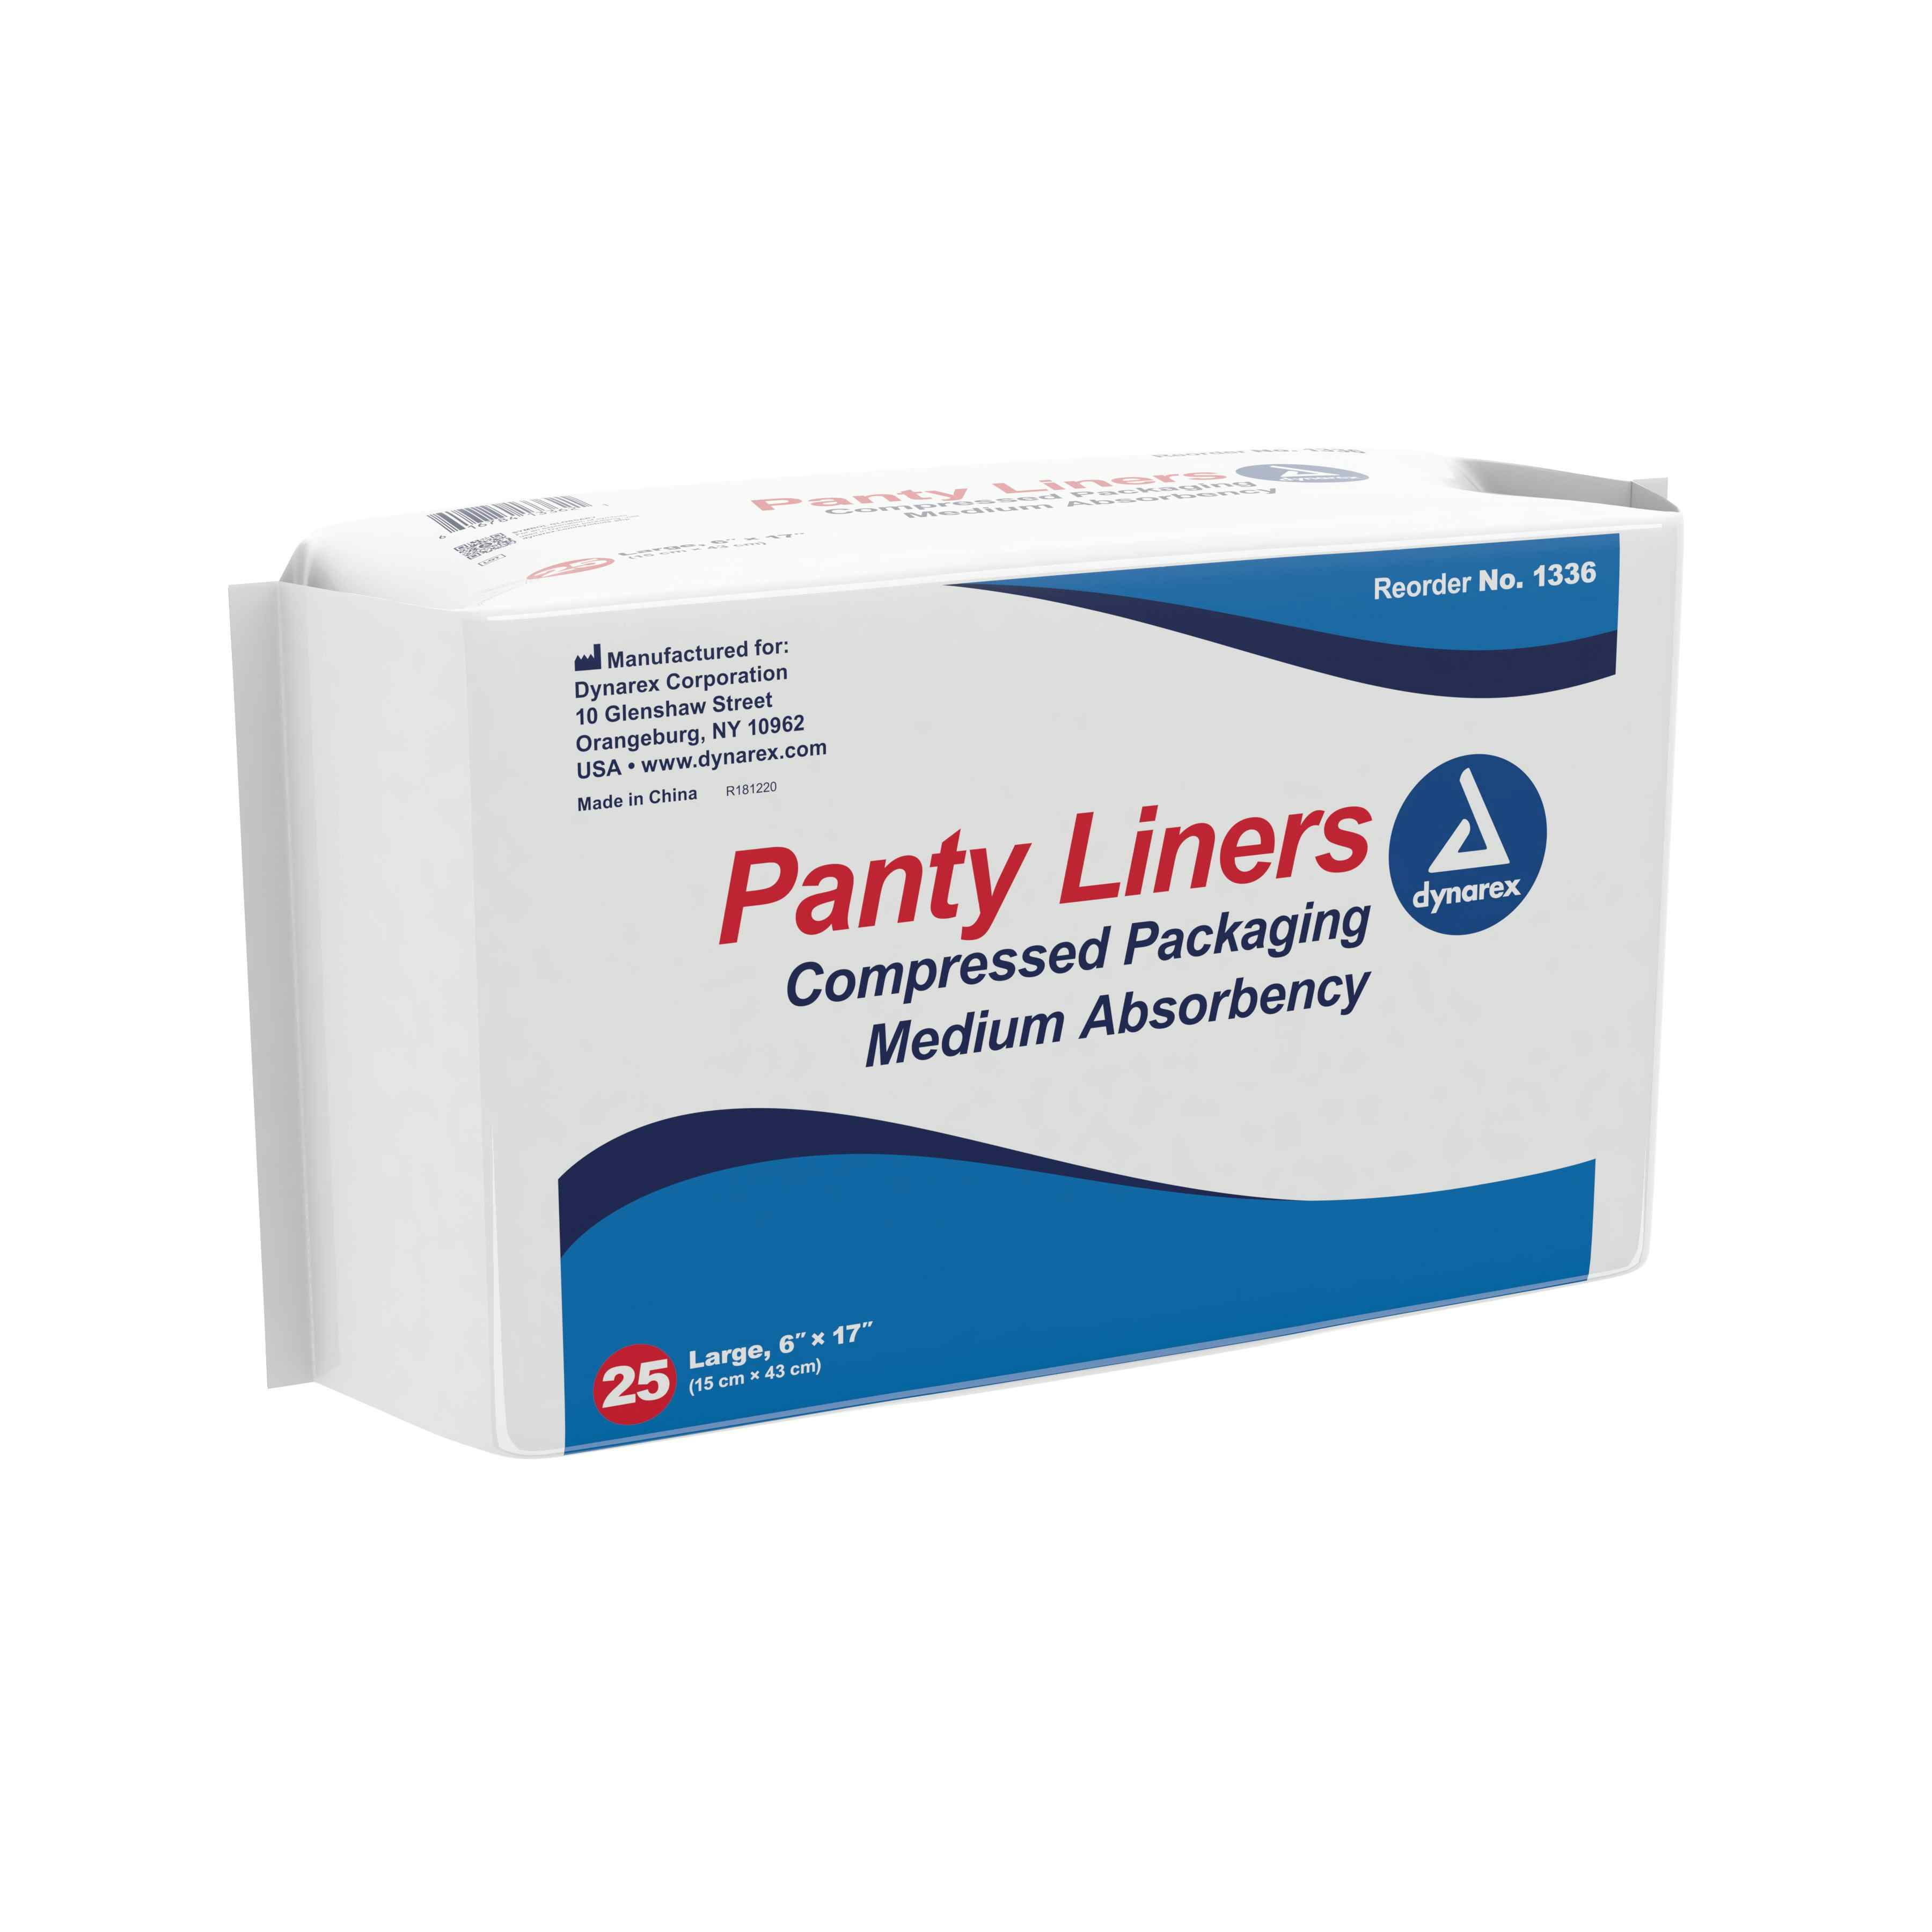 Dynarex Panty Liners, Moderate Absorbency, 1336, 6 X 17" - Pack of 25